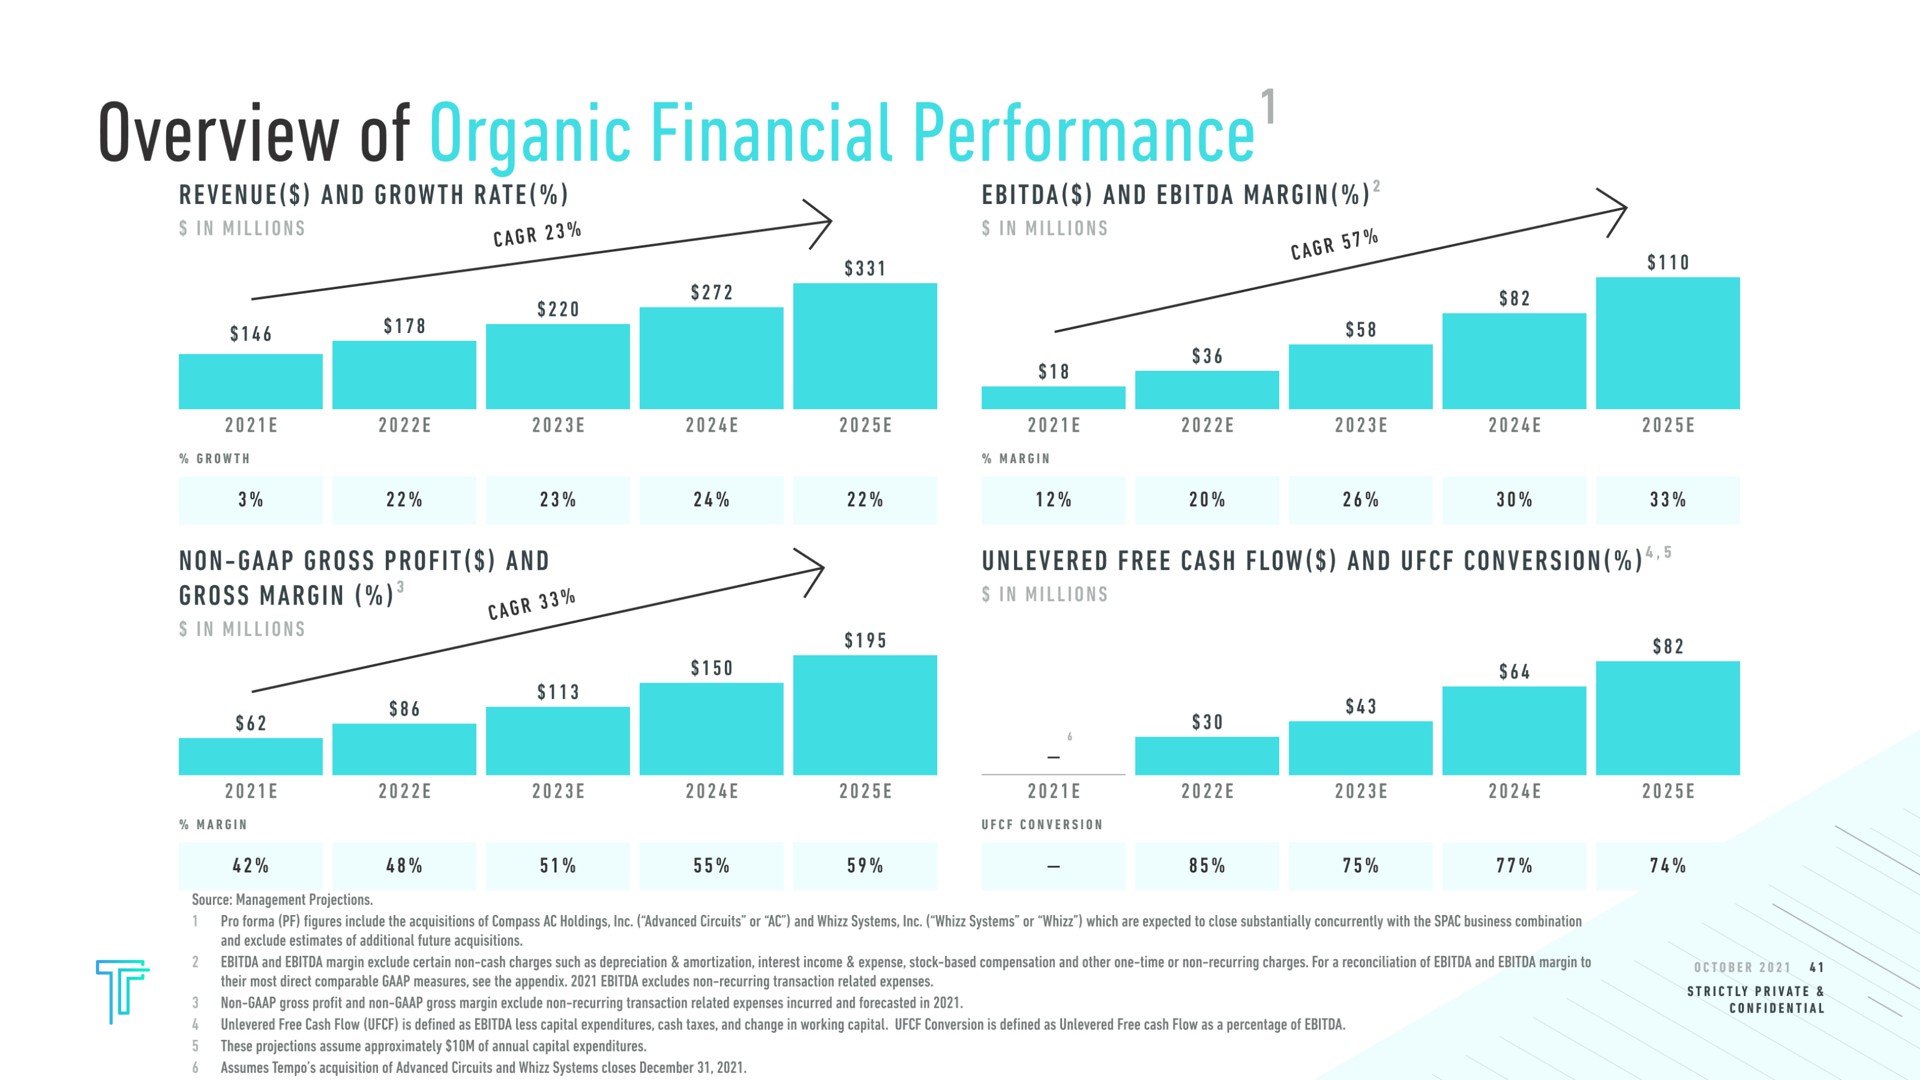 overview of organic financial performance revenue and growth rate in millions and margin in millions non gross profit and gross margin in millions free cash flow and conversion oes | Tempo